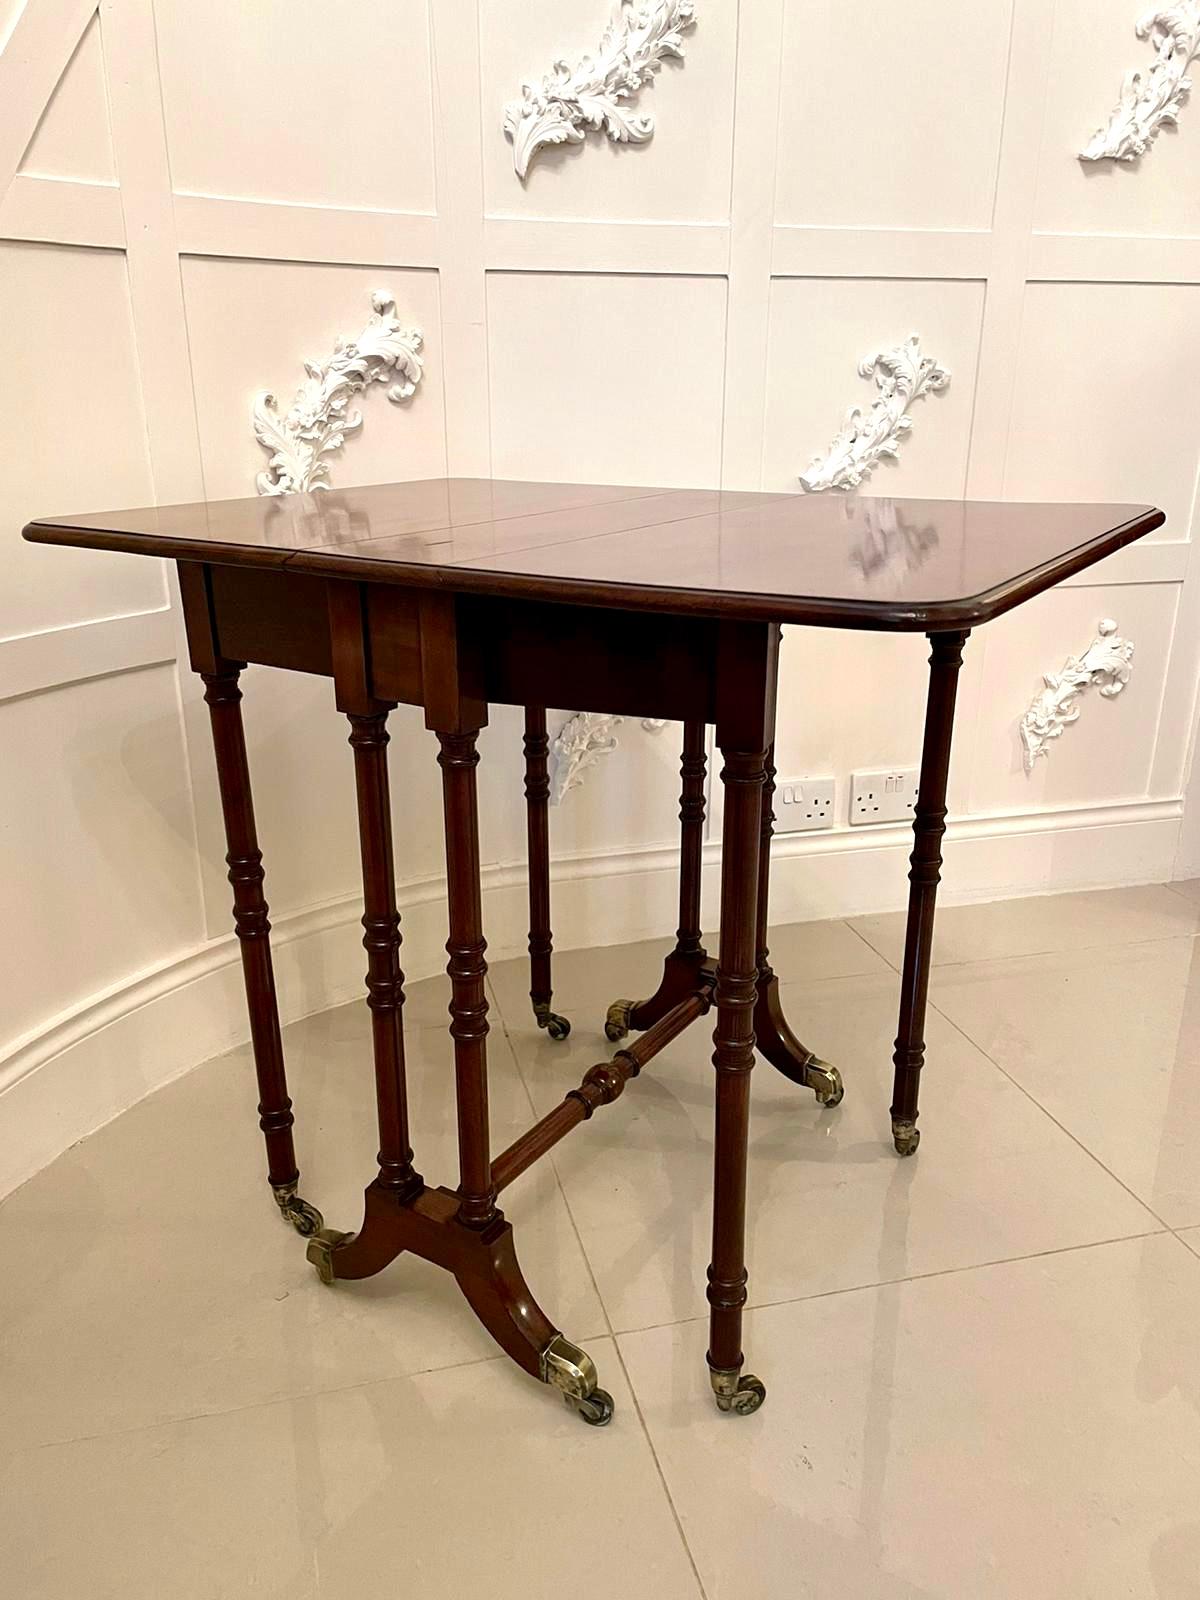 Antique Early 19th Century George III Mahogany Spider Leg Drop-Leaf Table For Sale 3